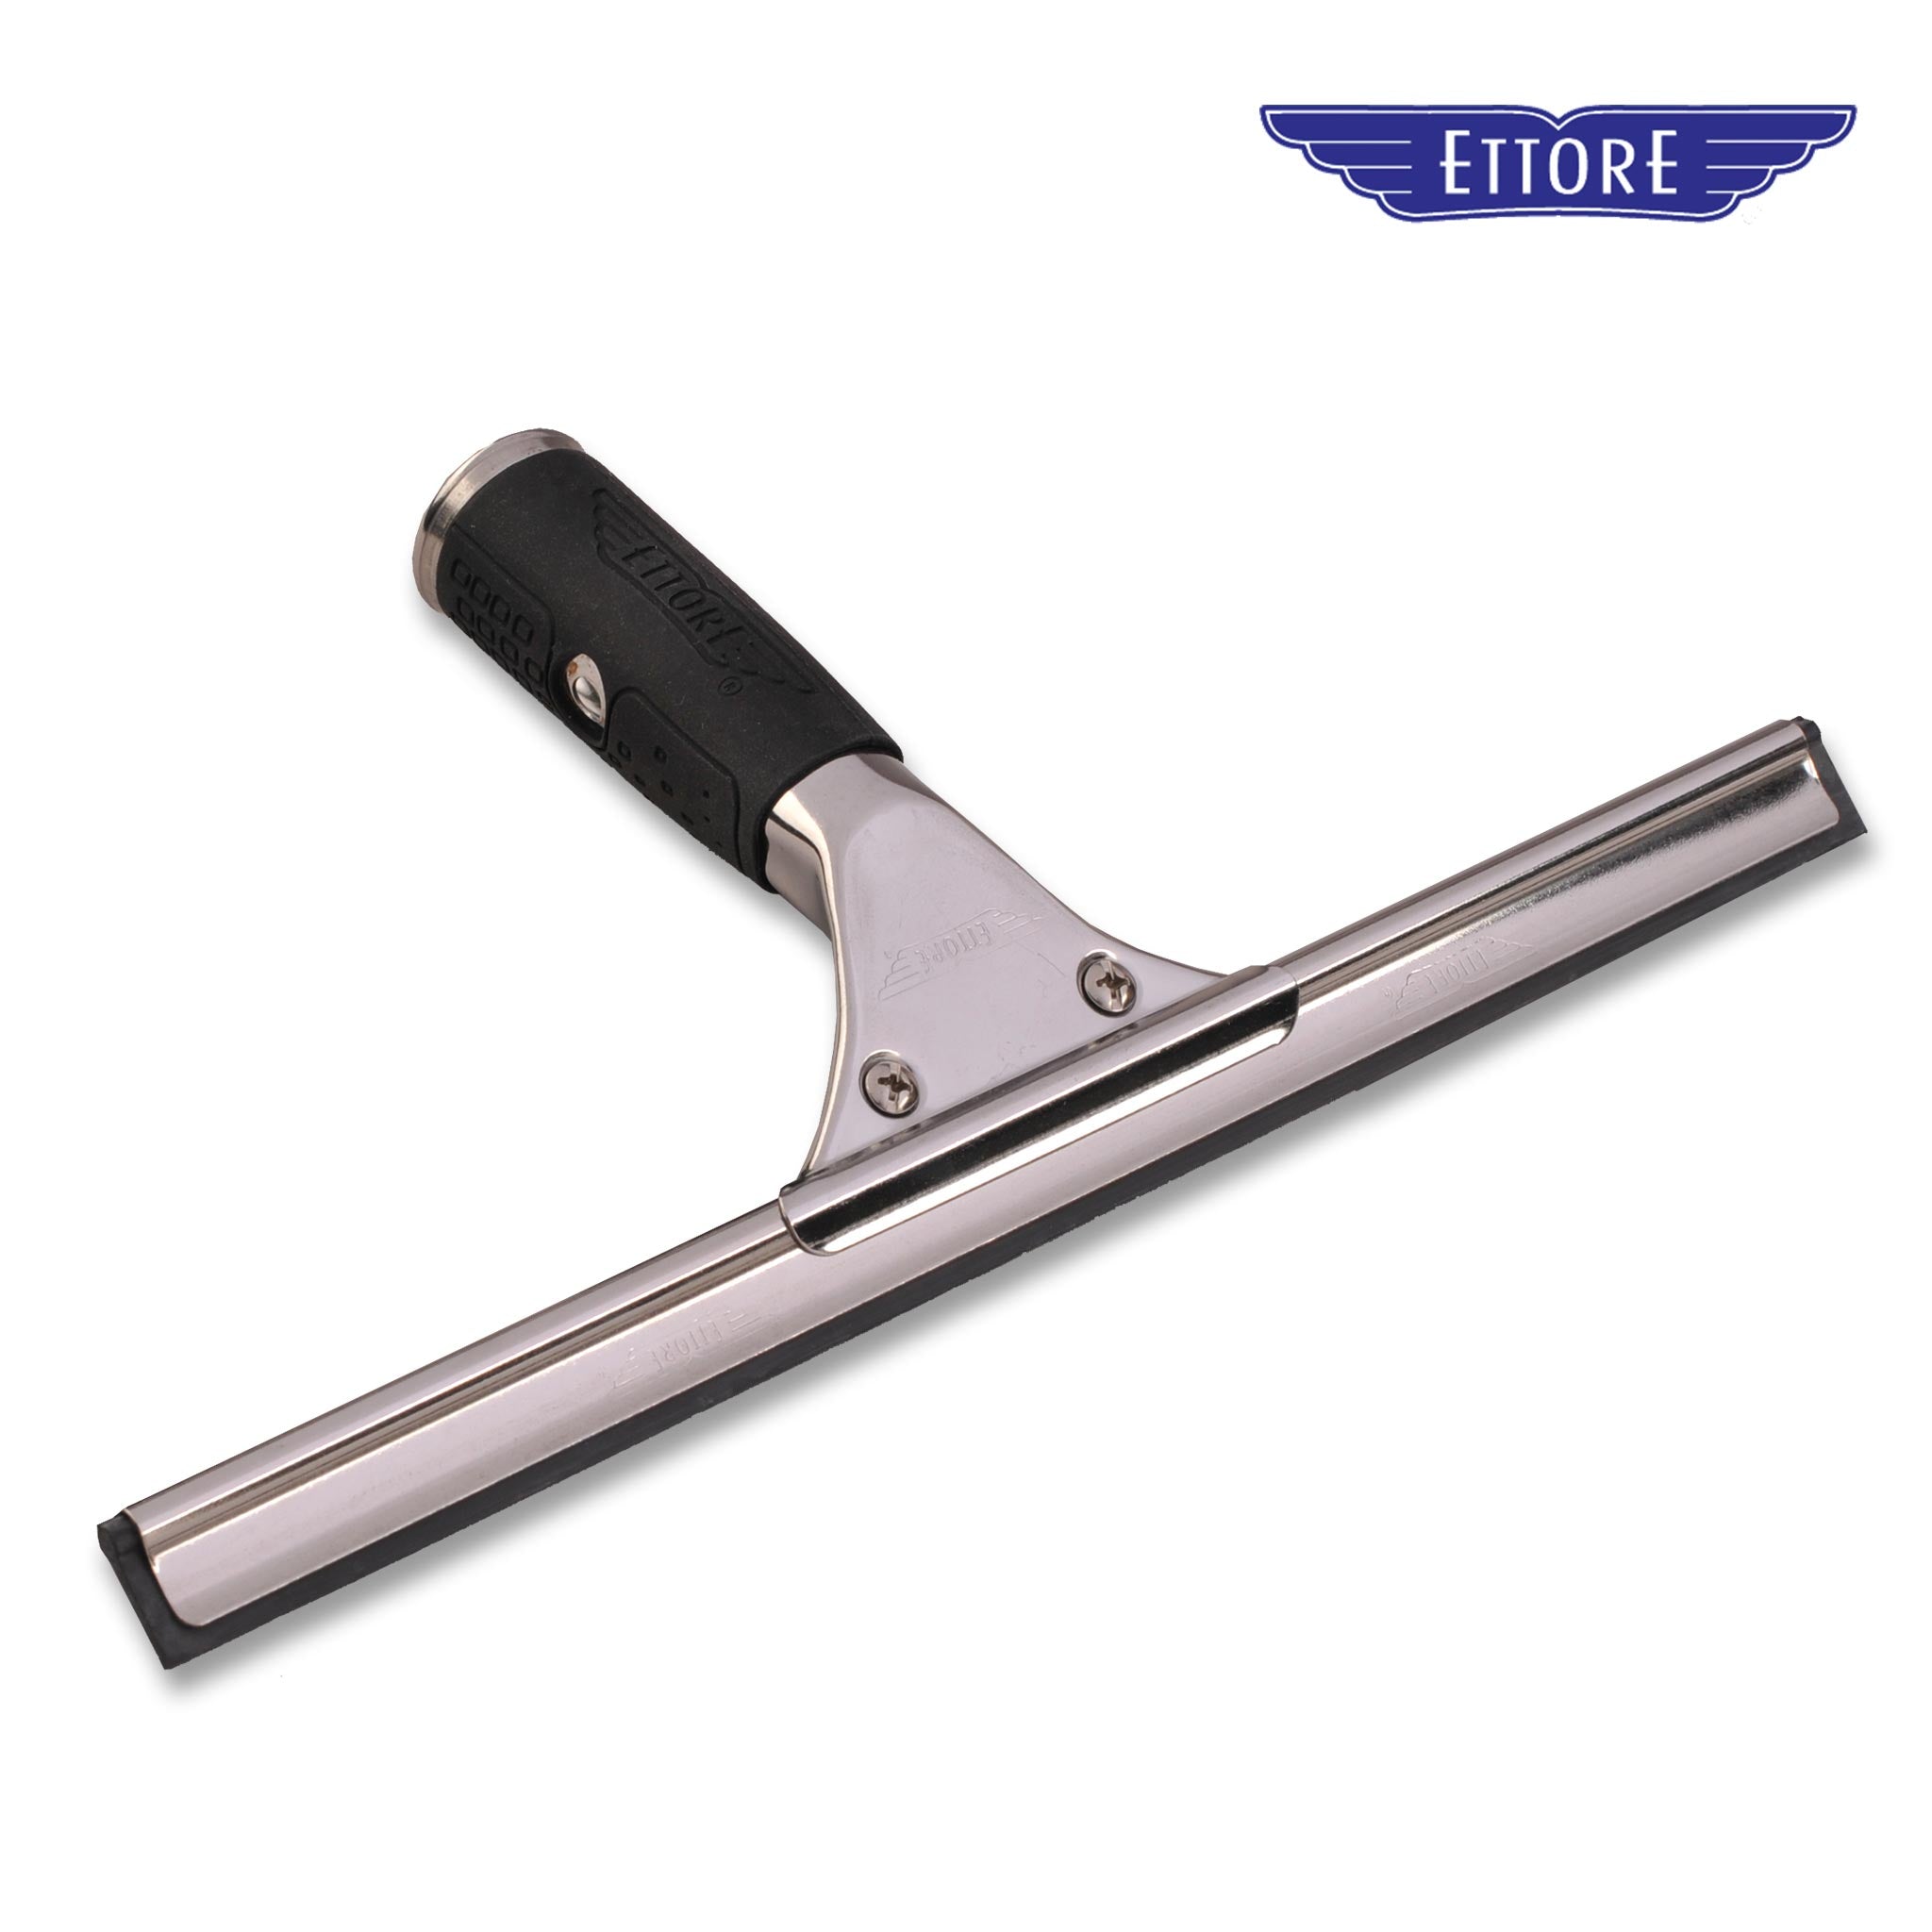 Ettore Master Squeegee with Rubber Grip